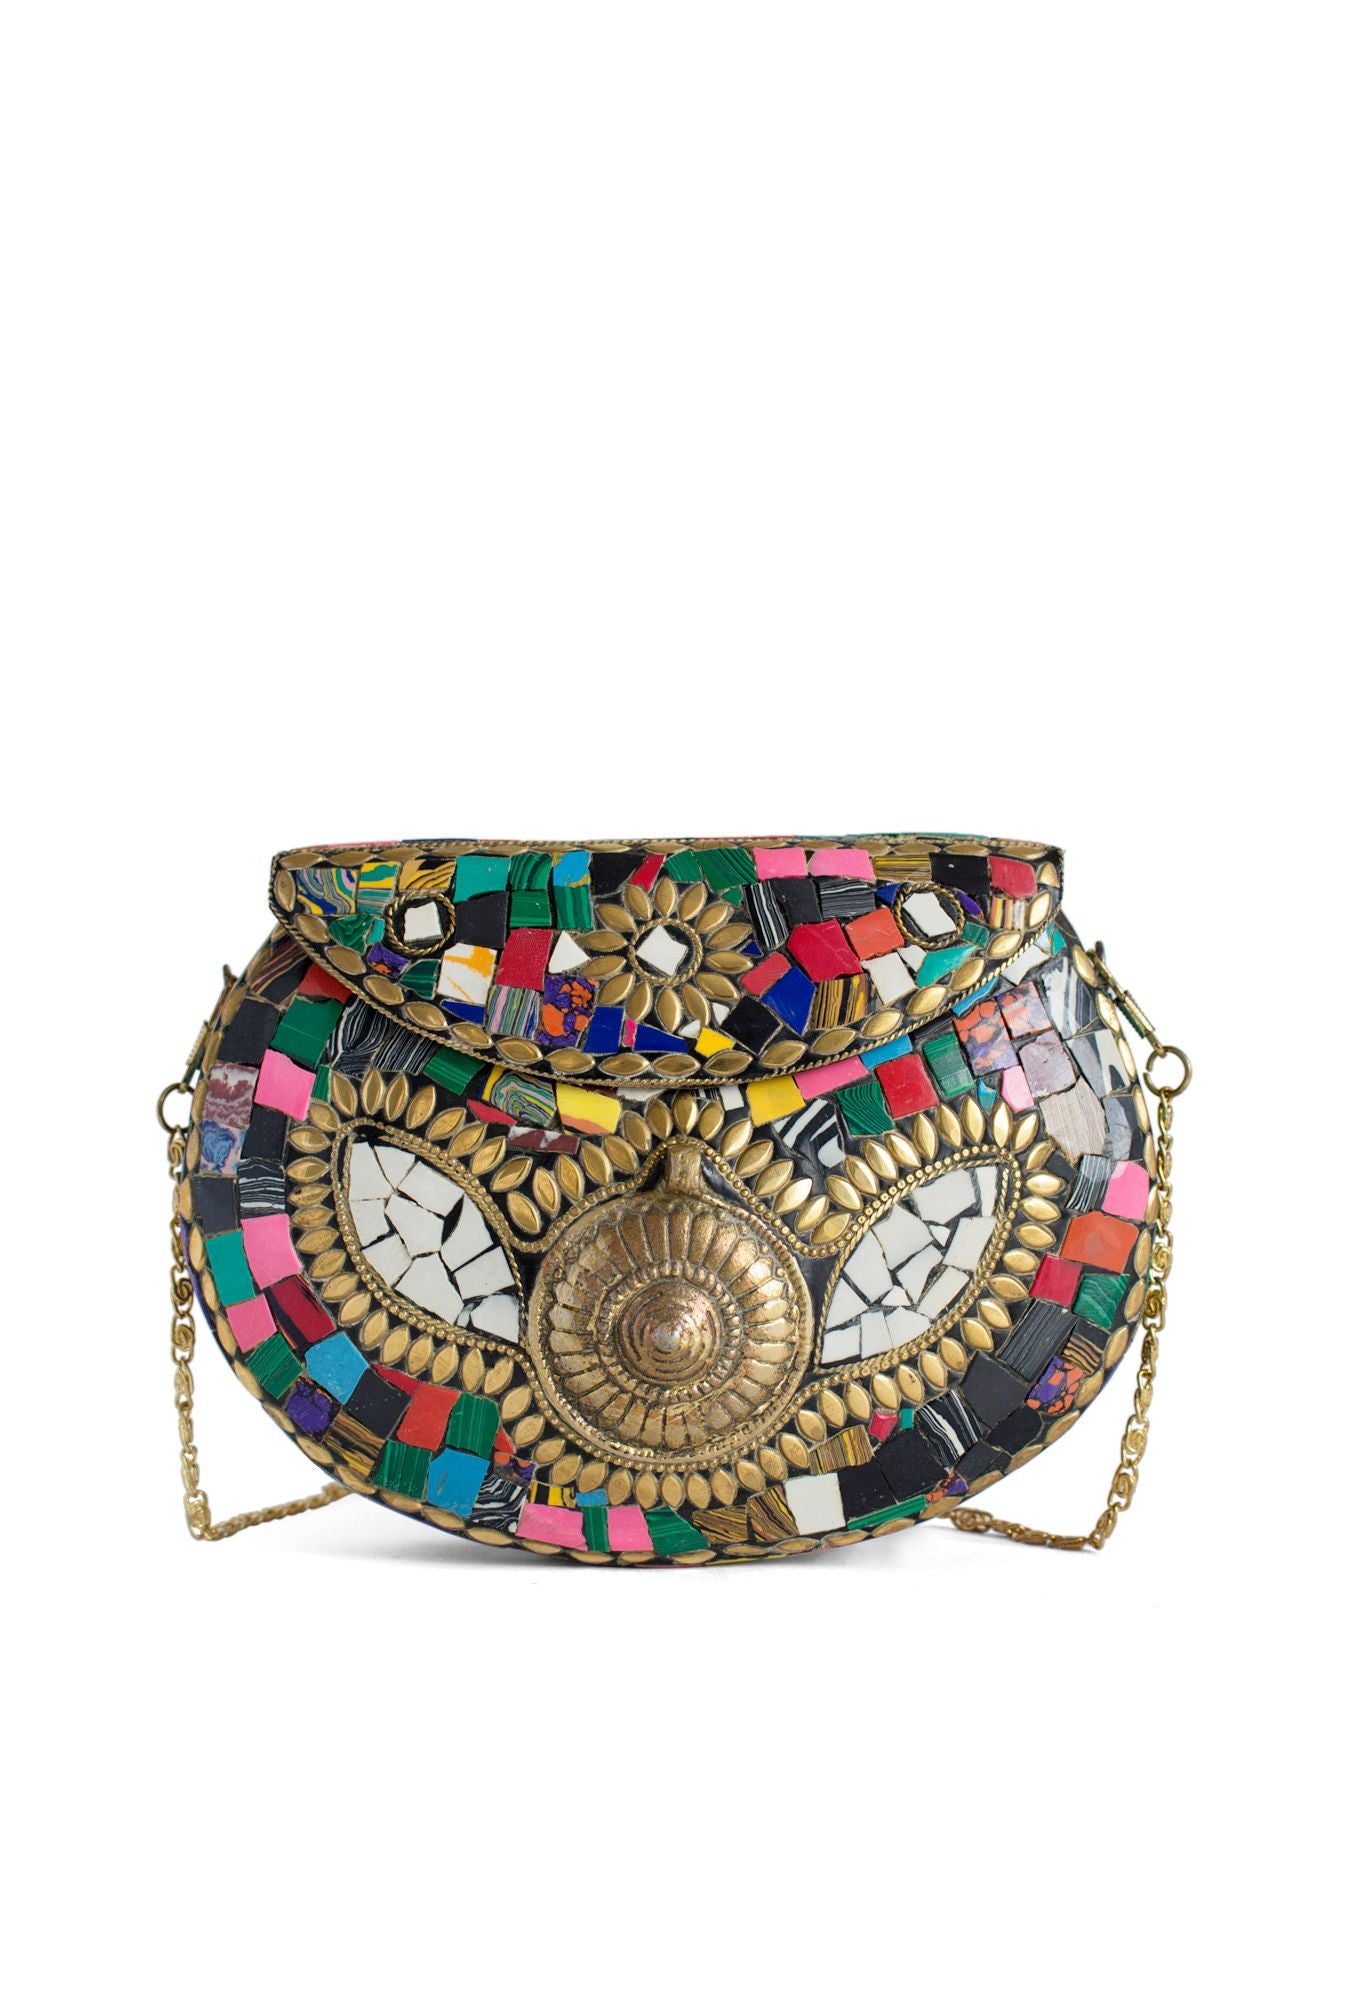 Quirky Vintage Clutch with Multi-colored Stone Inlay – Equal Hands